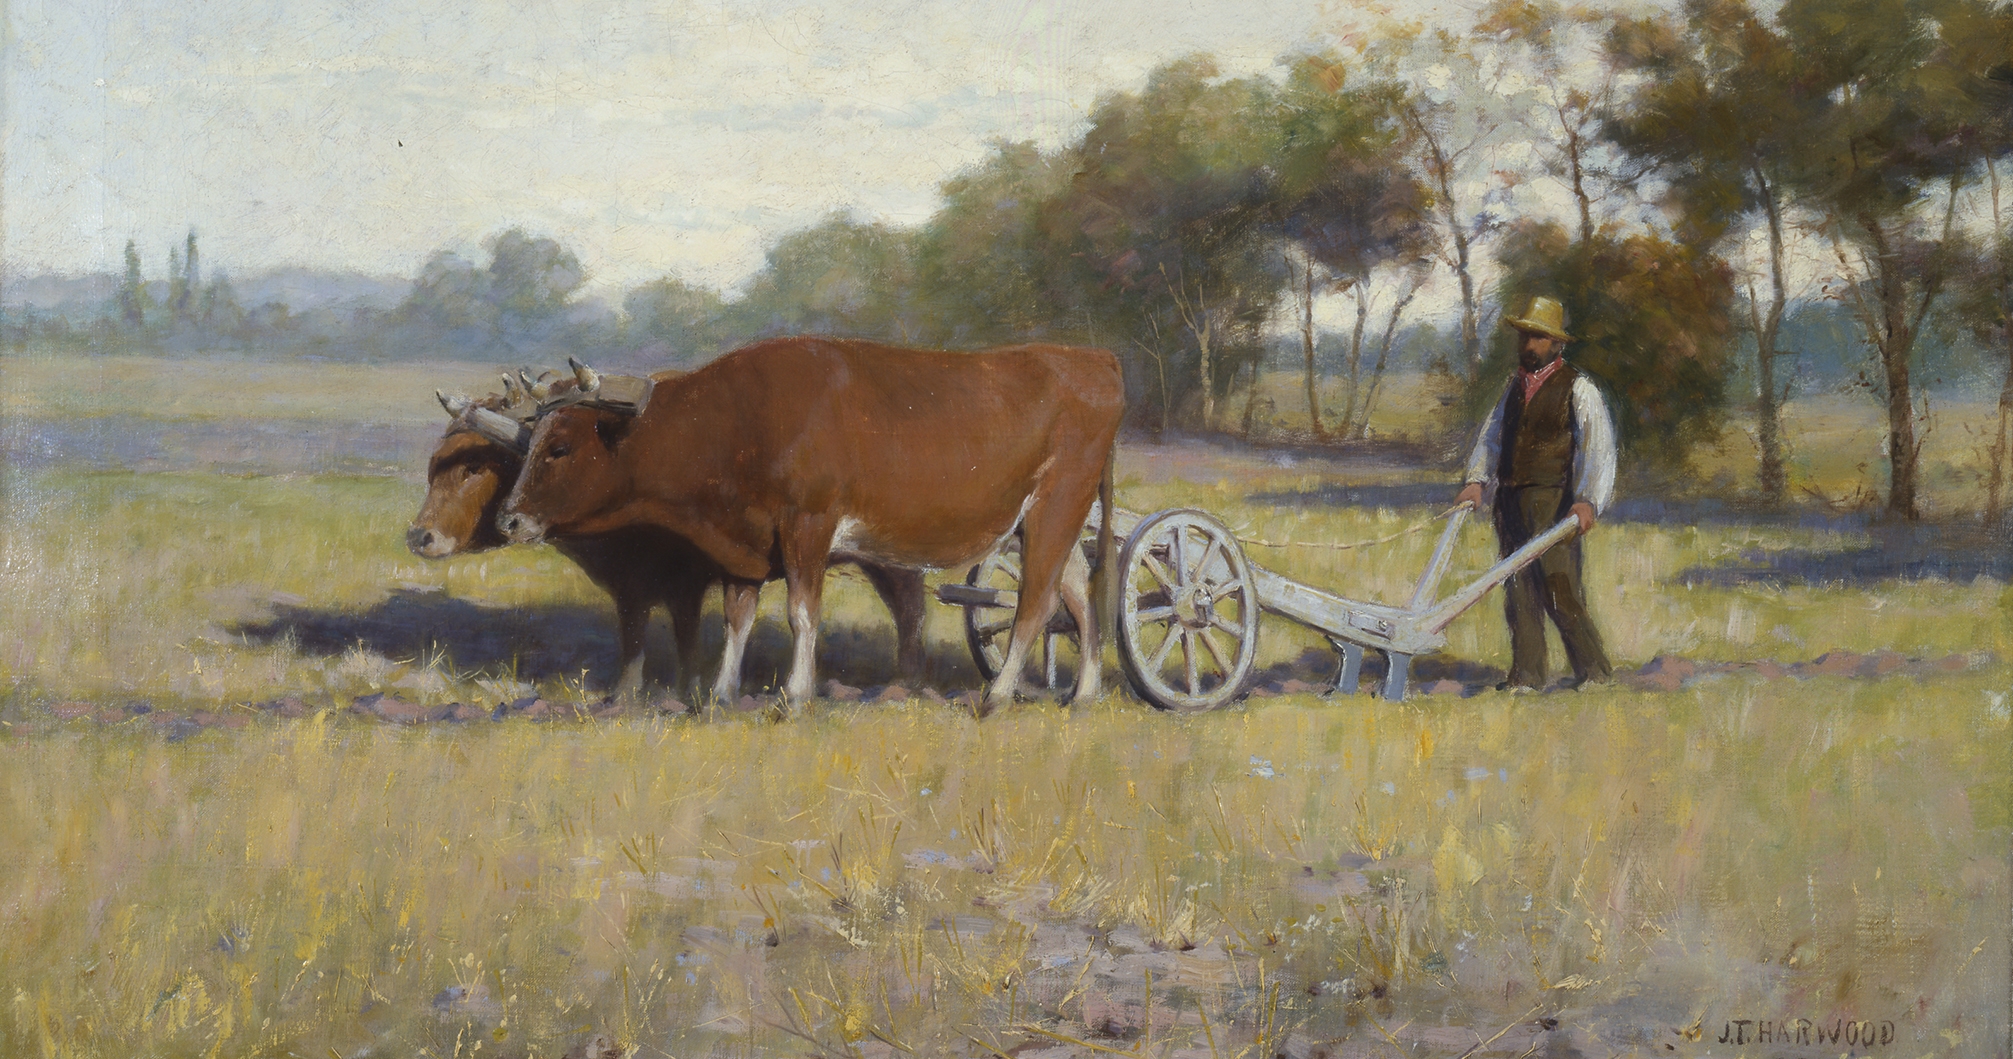 Painting depicts two oxen pulling a plow following a farmer working his field.